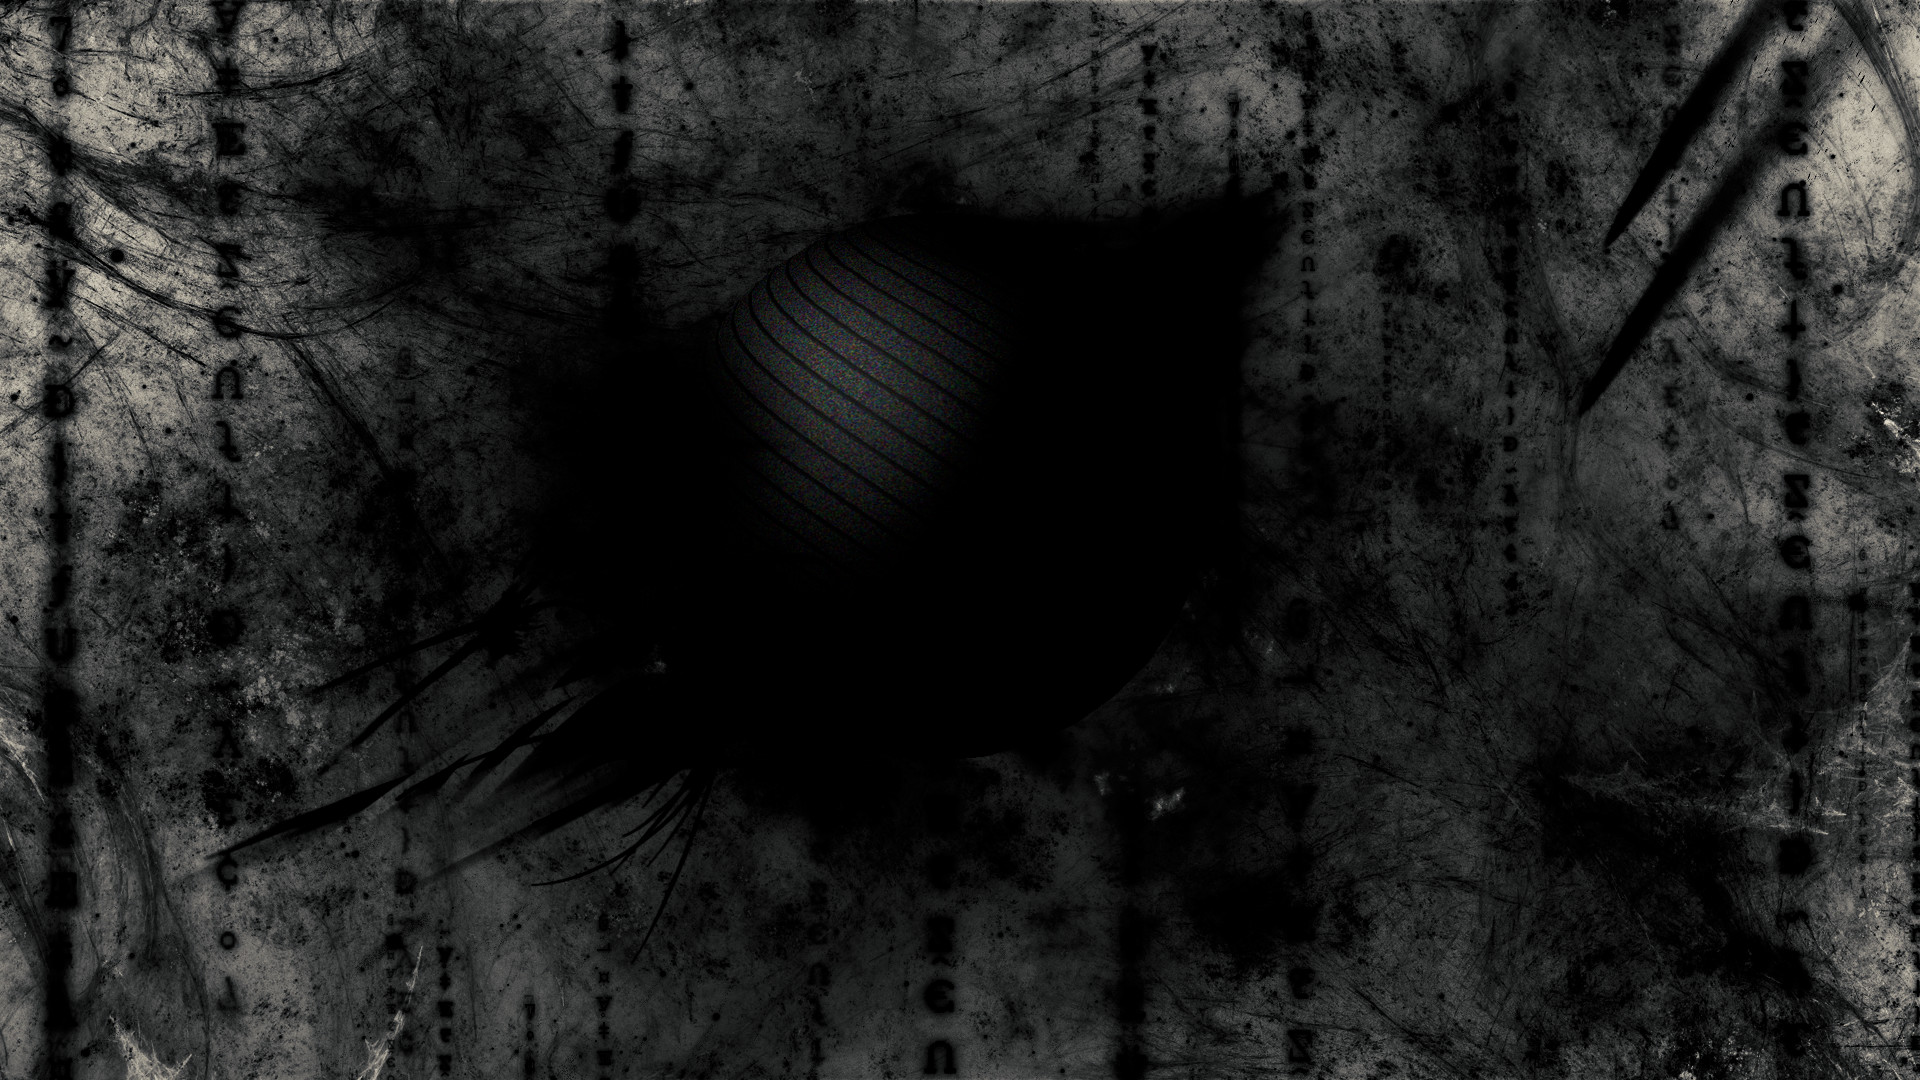 1920x1080 ... The World of Darkness (Wallpaper) by Hardii